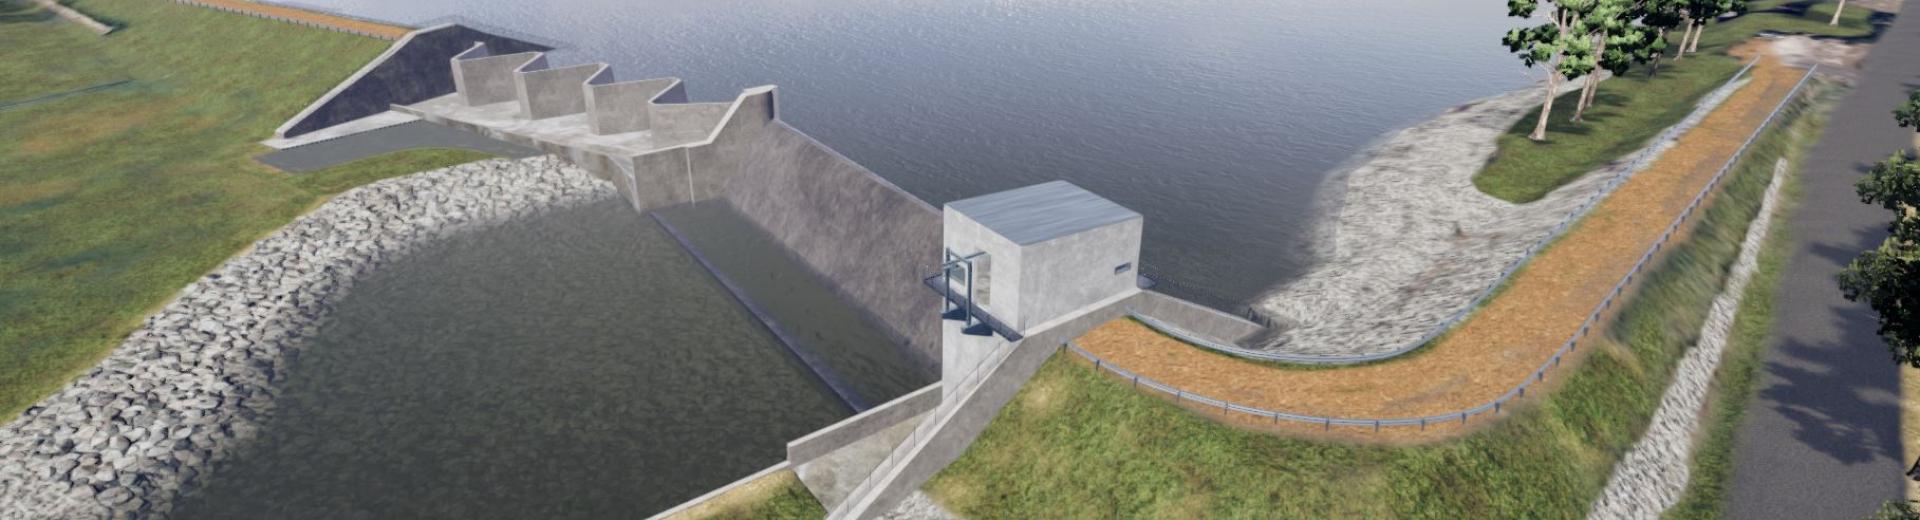 Artist impression of the upgrades for the Lake Macdonald Dam Improvement Program - right side view